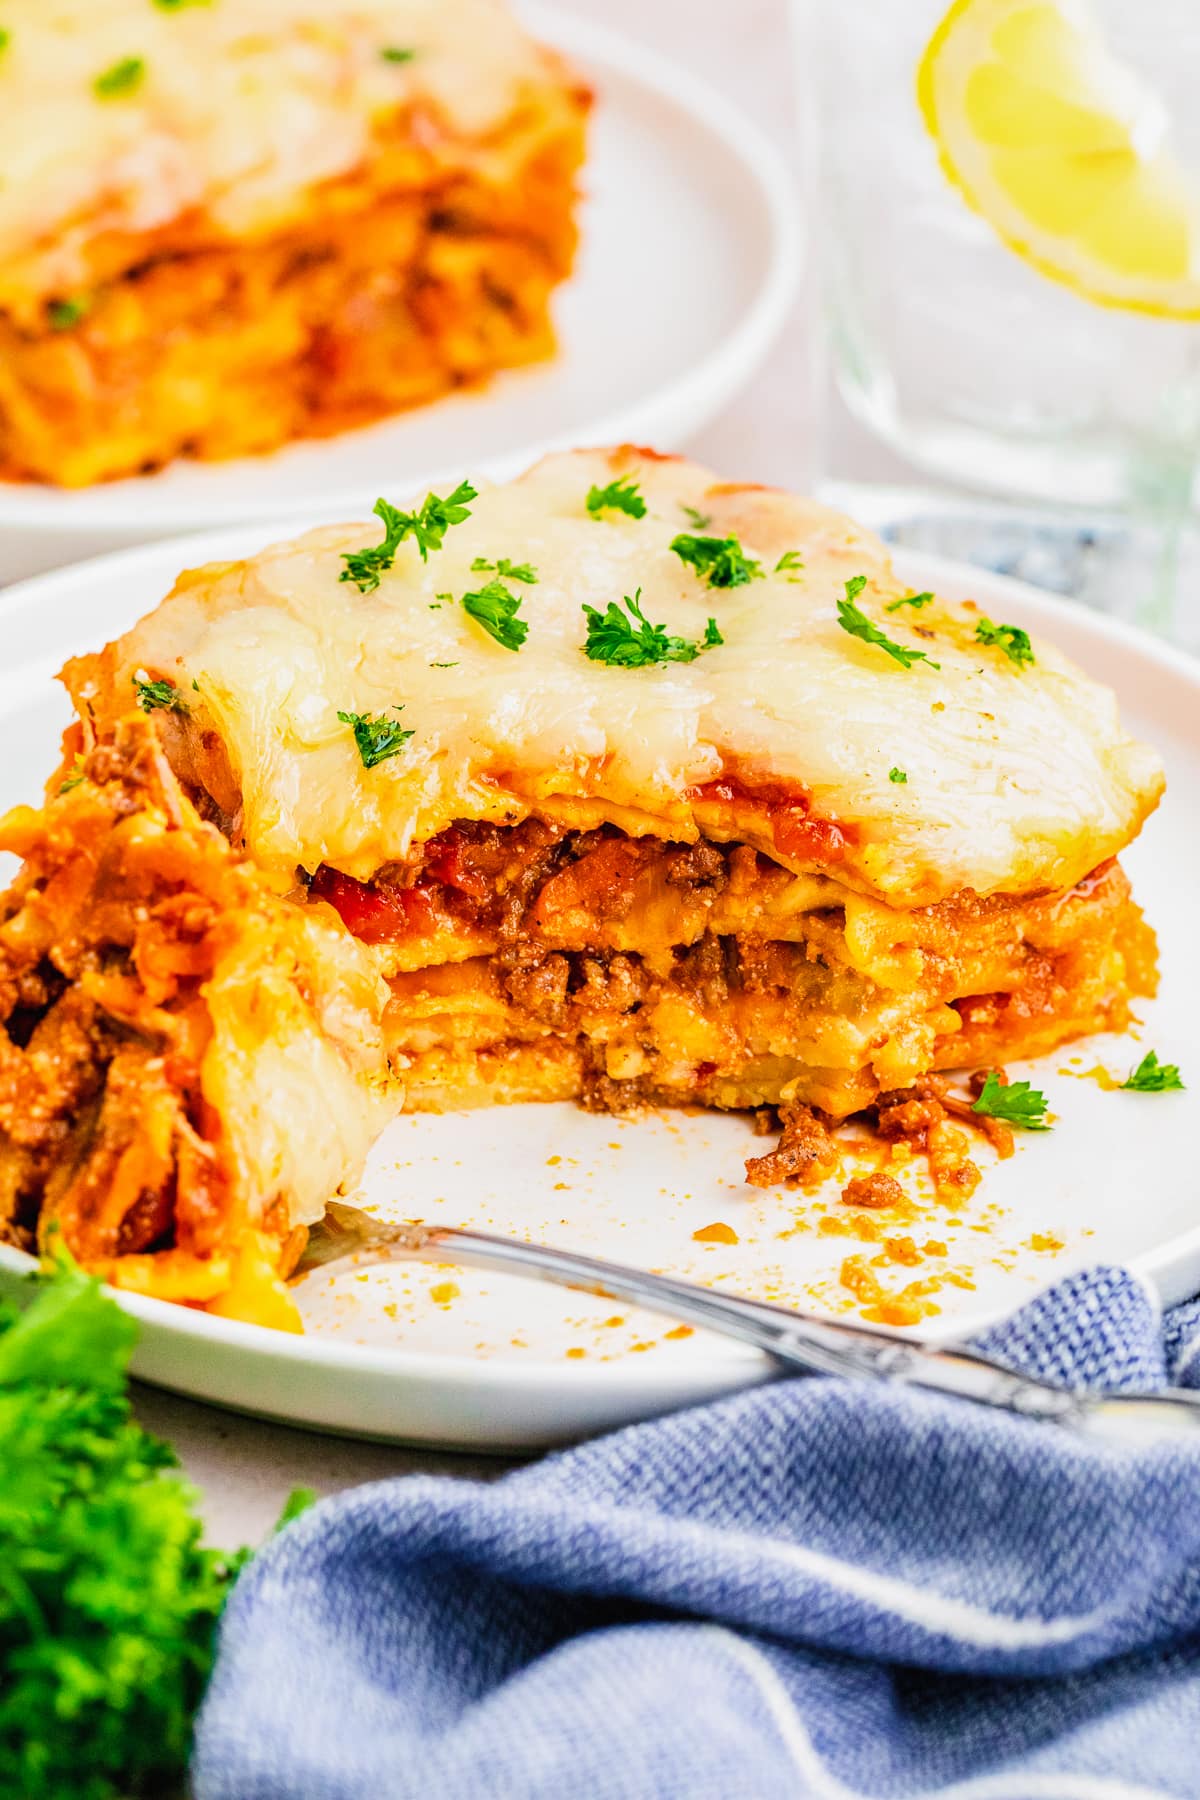 lasagna bolognese on a plate with a fork and bite full taken out.